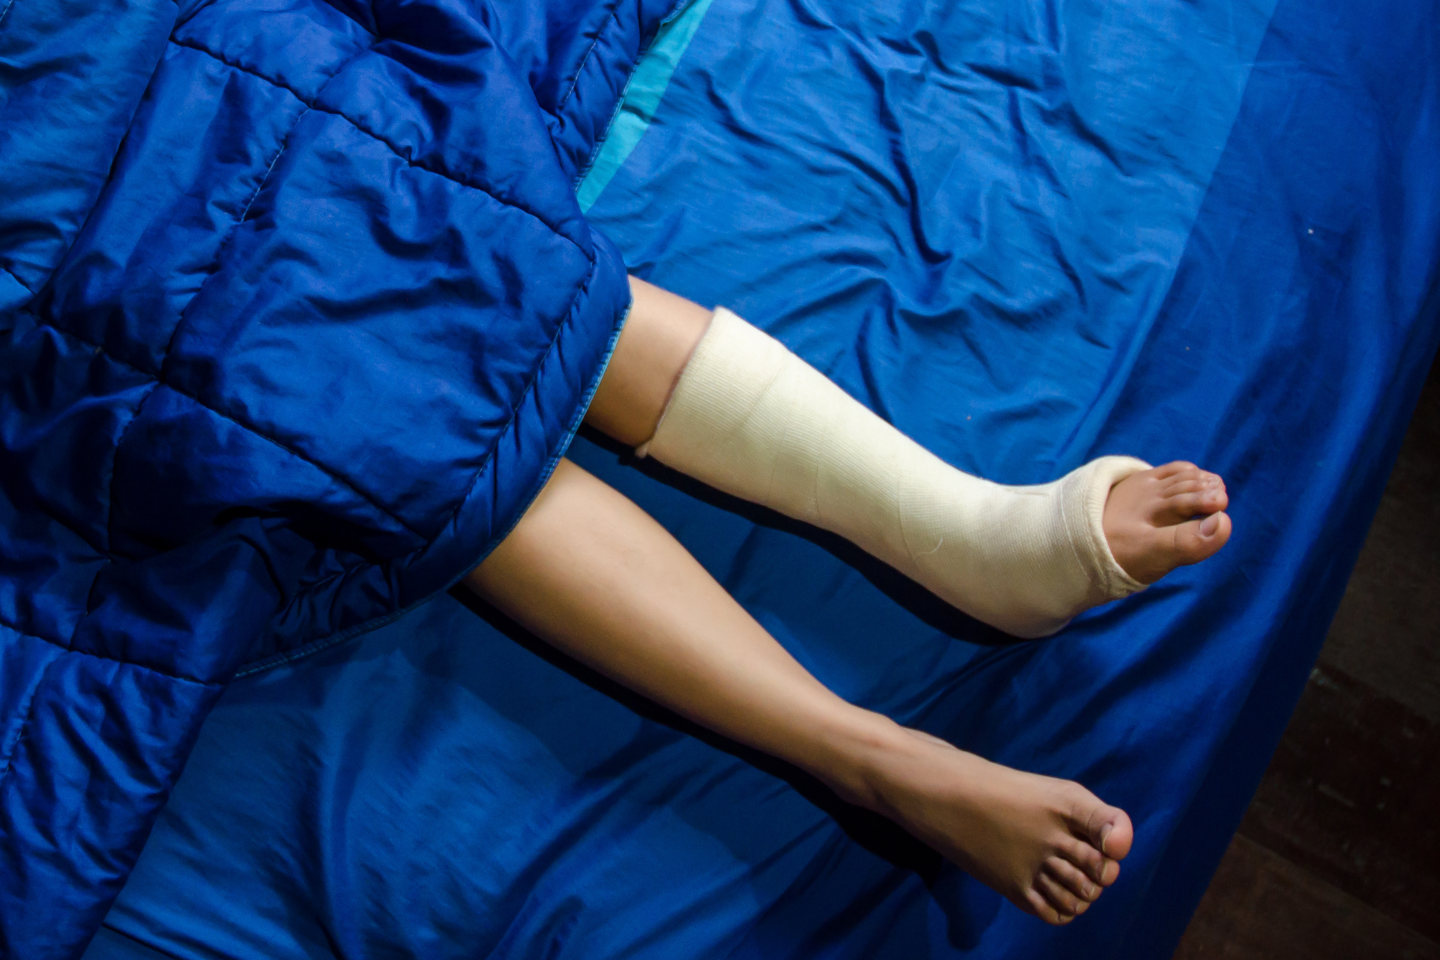 Asian girl is sleeping on blue bed in bedroom.Ankle strap for treating torn wound of foot injury. On the blue floor.Foot and ankle strap protects against injury.Do not focus on objects.